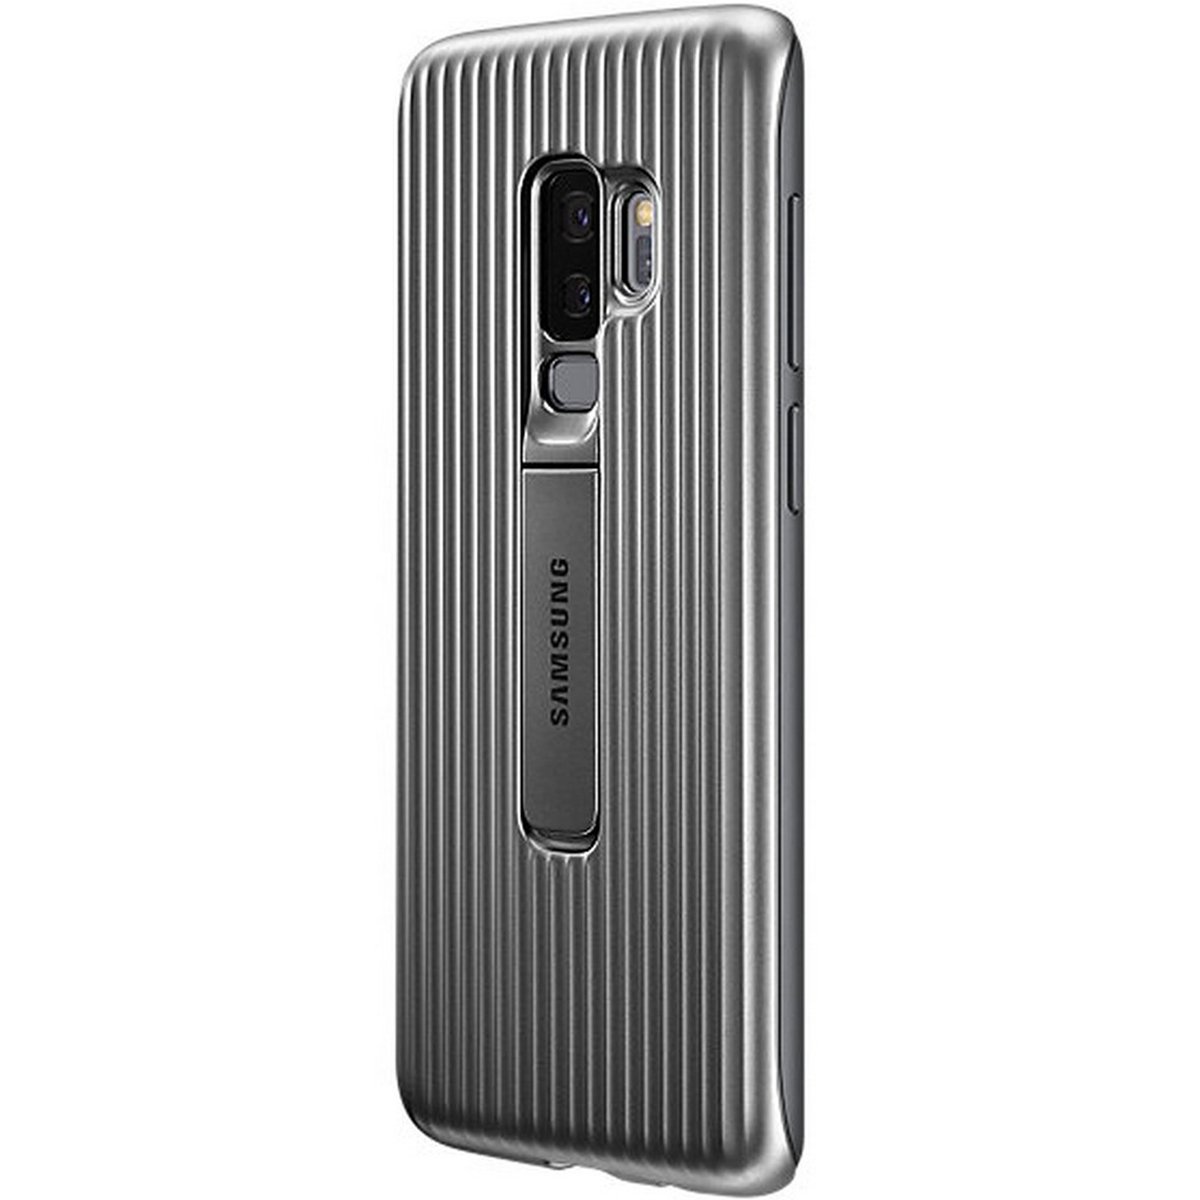 Samsung Galaxy S9+ Protective Standing Cover Silver EF-RG965CSEGWW